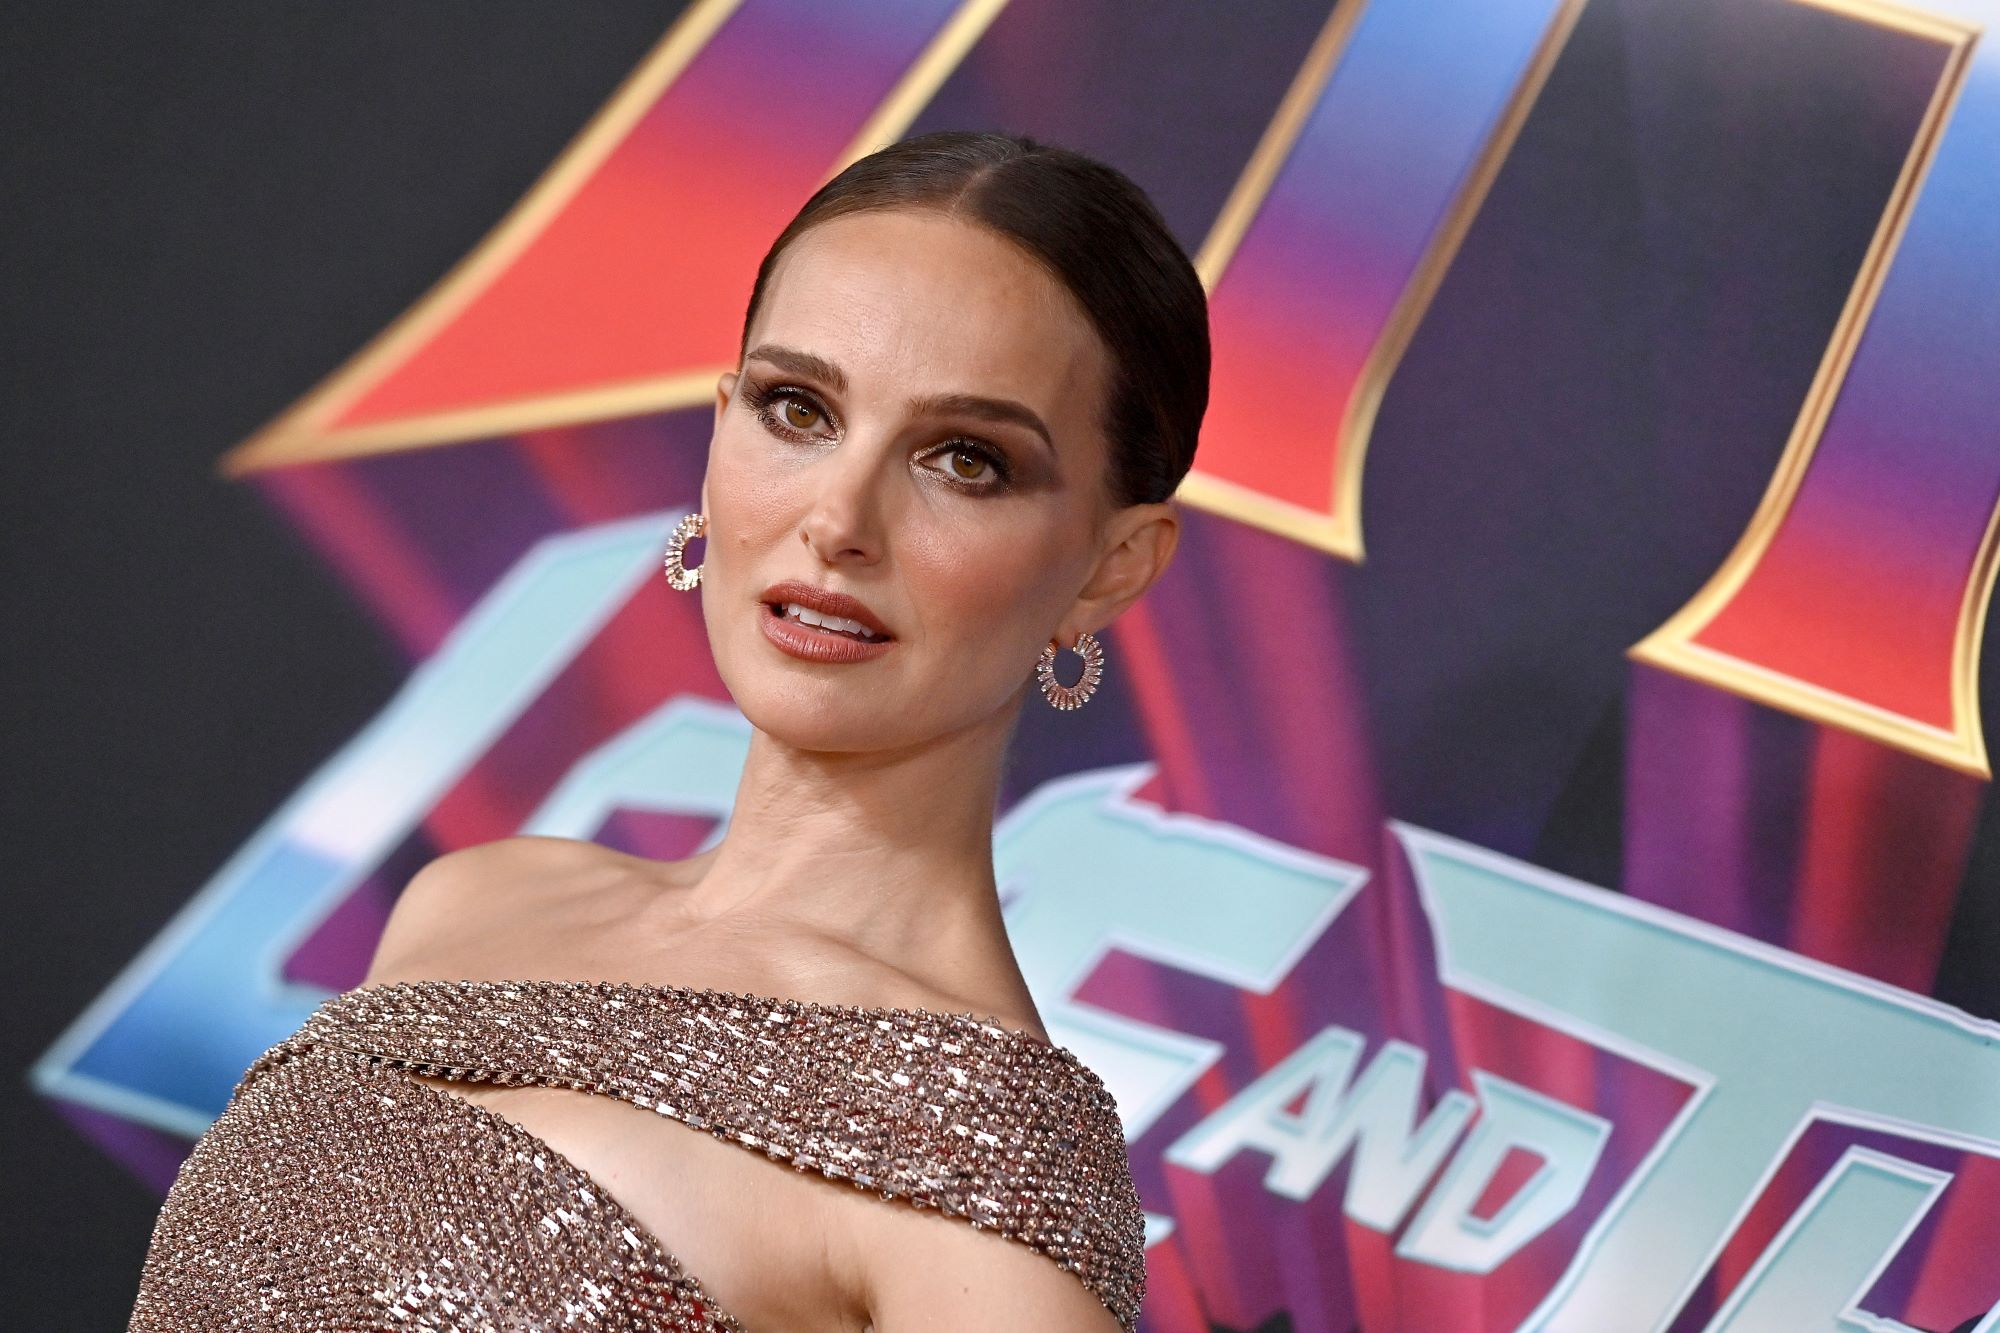 Natalie Portman, who may appear in a 'Thor: Love and Thunder' deleted scene, wears a beige sparkly dress.